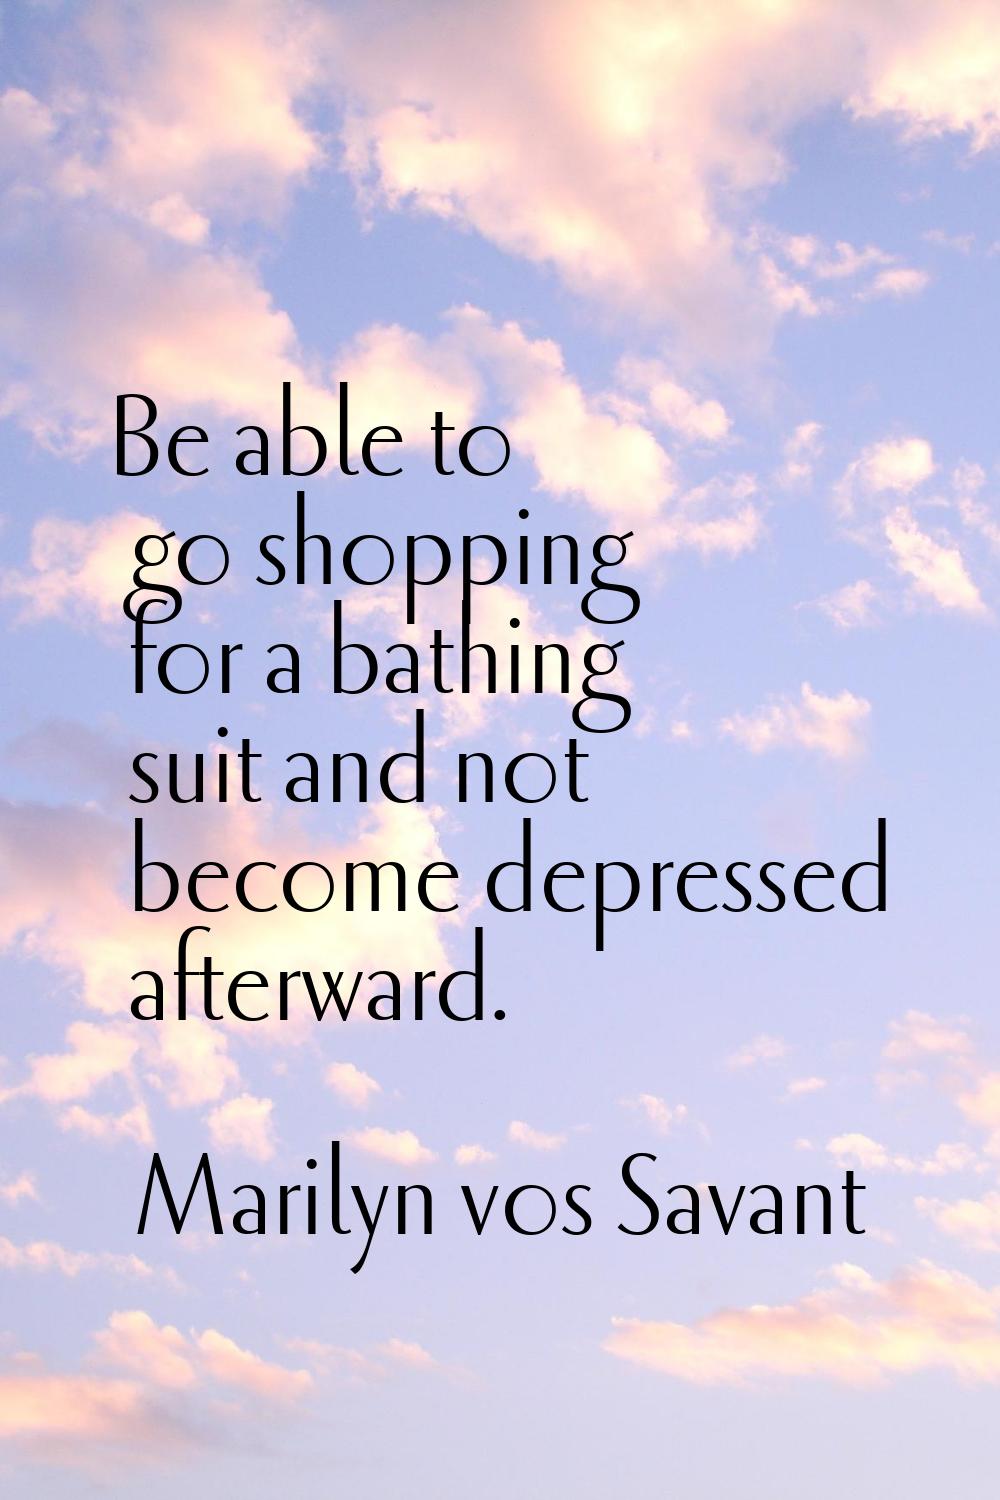 Be able to go shopping for a bathing suit and not become depressed afterward.